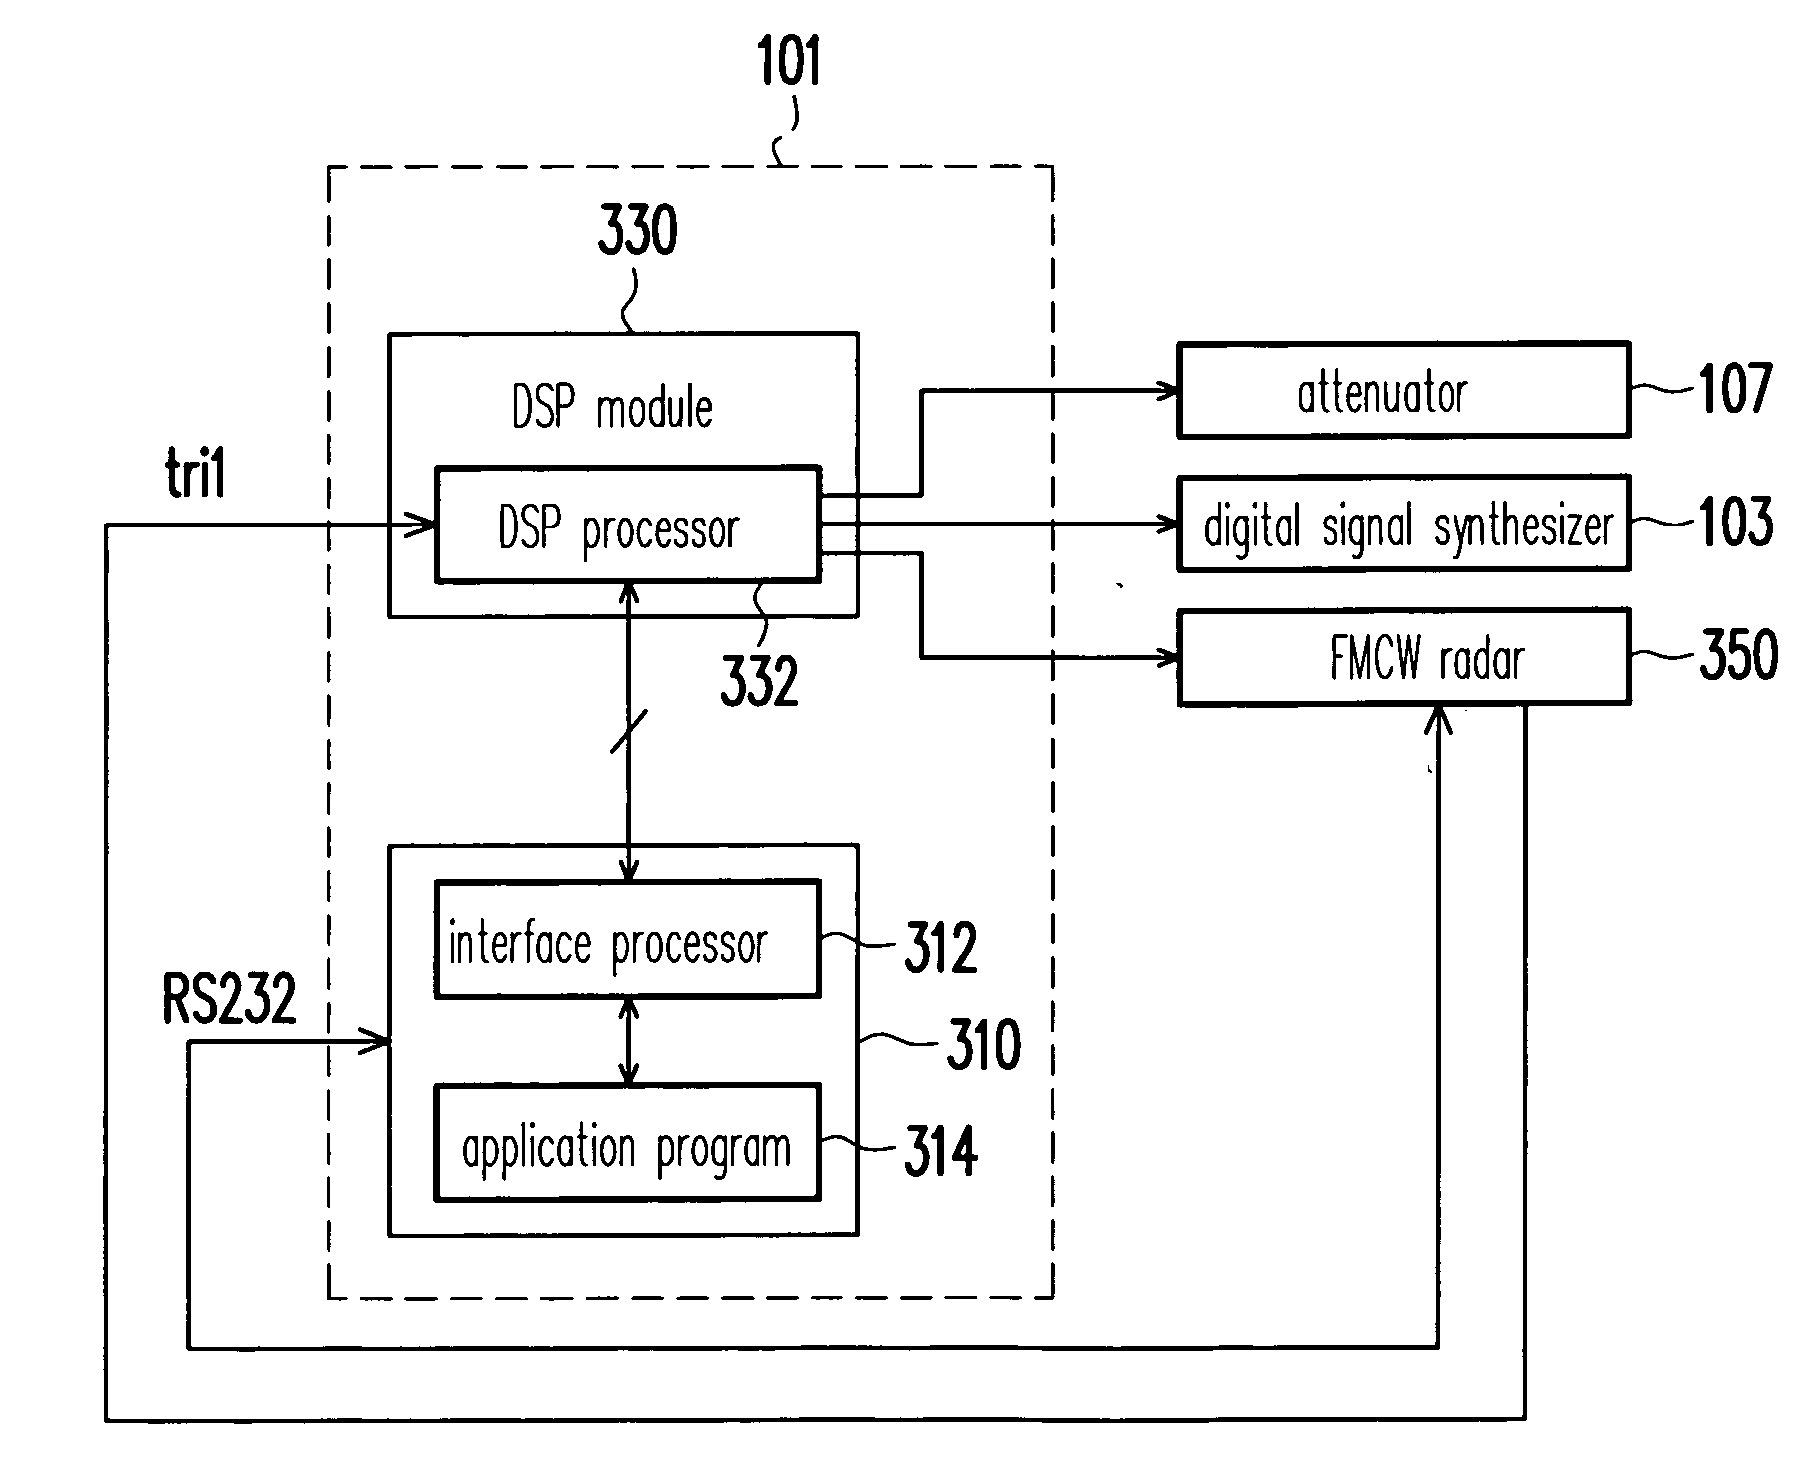 Programmable method and test device for generating target for FMCW radar